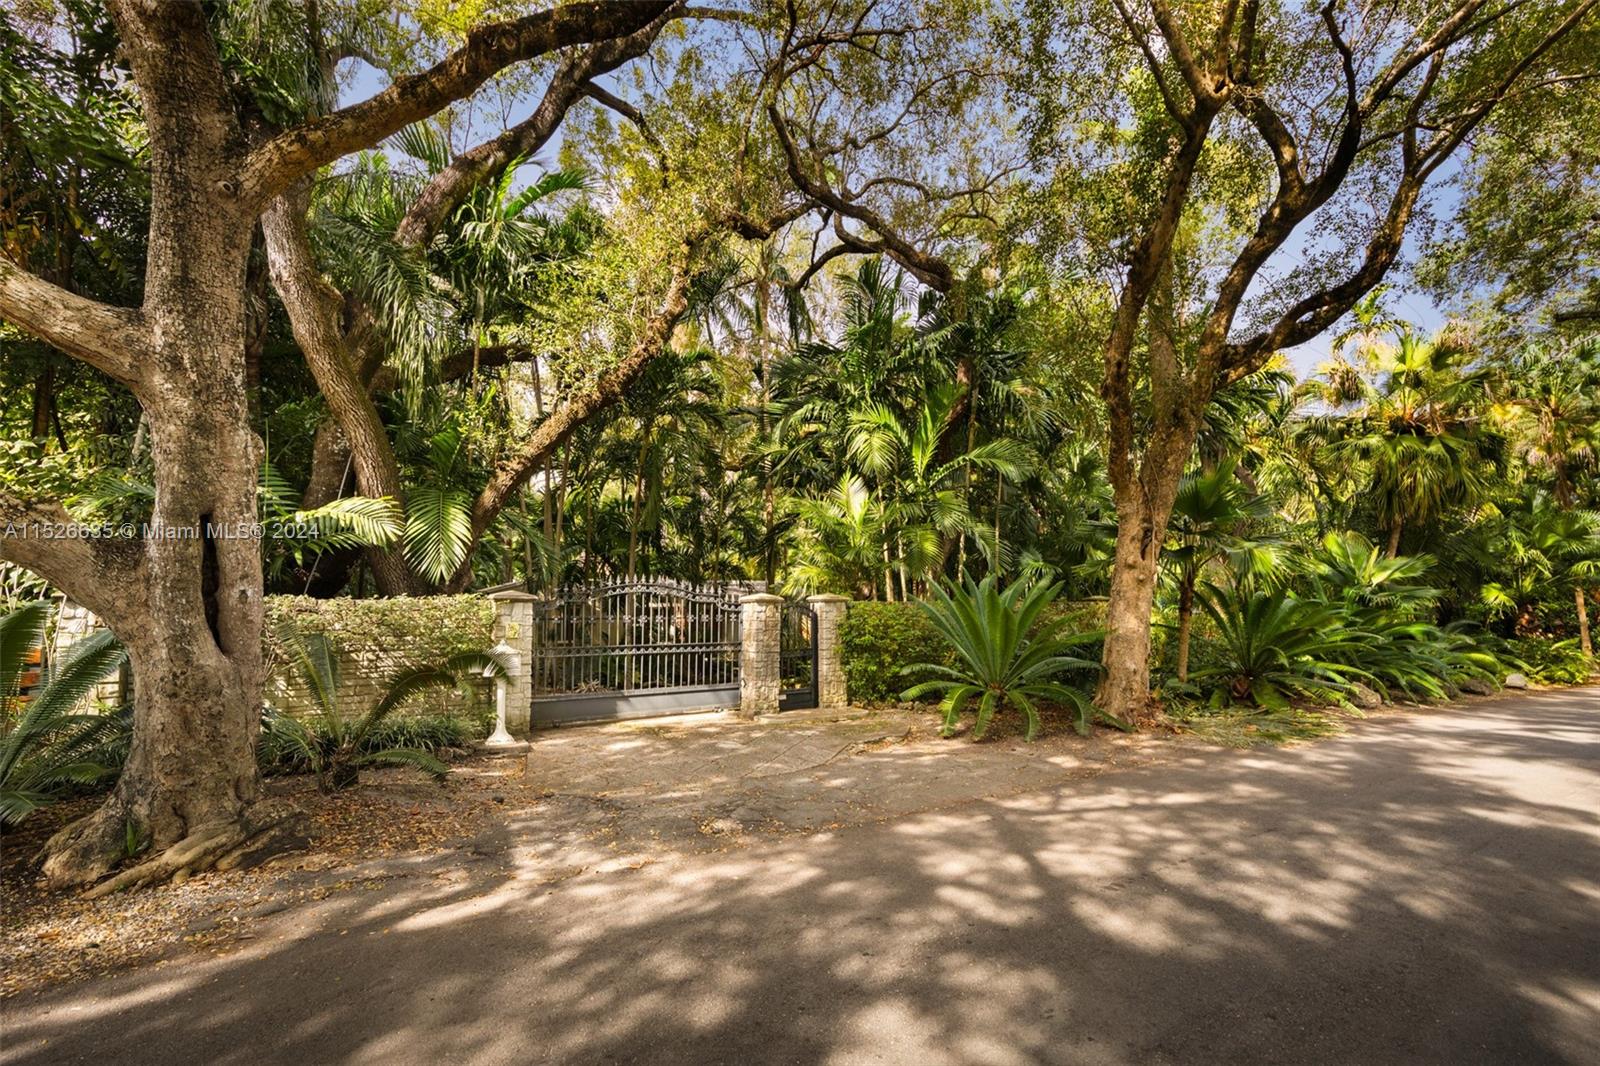 Quintessential “Old Miami” style home on a coveted, oak canopied North Grove street, in a neighborhood of large estate homes. Walk to bayfront parks and marinas and close to the Grove village center’s galleries, boutiques & cafes. Walled & gated, exceptionally private grounds (20,000 SF) w/winding walkways through the lush tropical gardens. The main house is 2005 SFLA and features 3BR/2BA, vaulted beamed ceilings, original fireplace, wood flooring and French doors that open to 25 meter lap pool & expansive wood deck. Charming guest house (500 SF) offers open living/bedroom space & marble bath. Listed at land value. Not in a flood zone (one of the highest elevations in South Florida. Ideally located just minutes from downtown, MIA, Coral Gables, Key Biscayne & the Beaches.